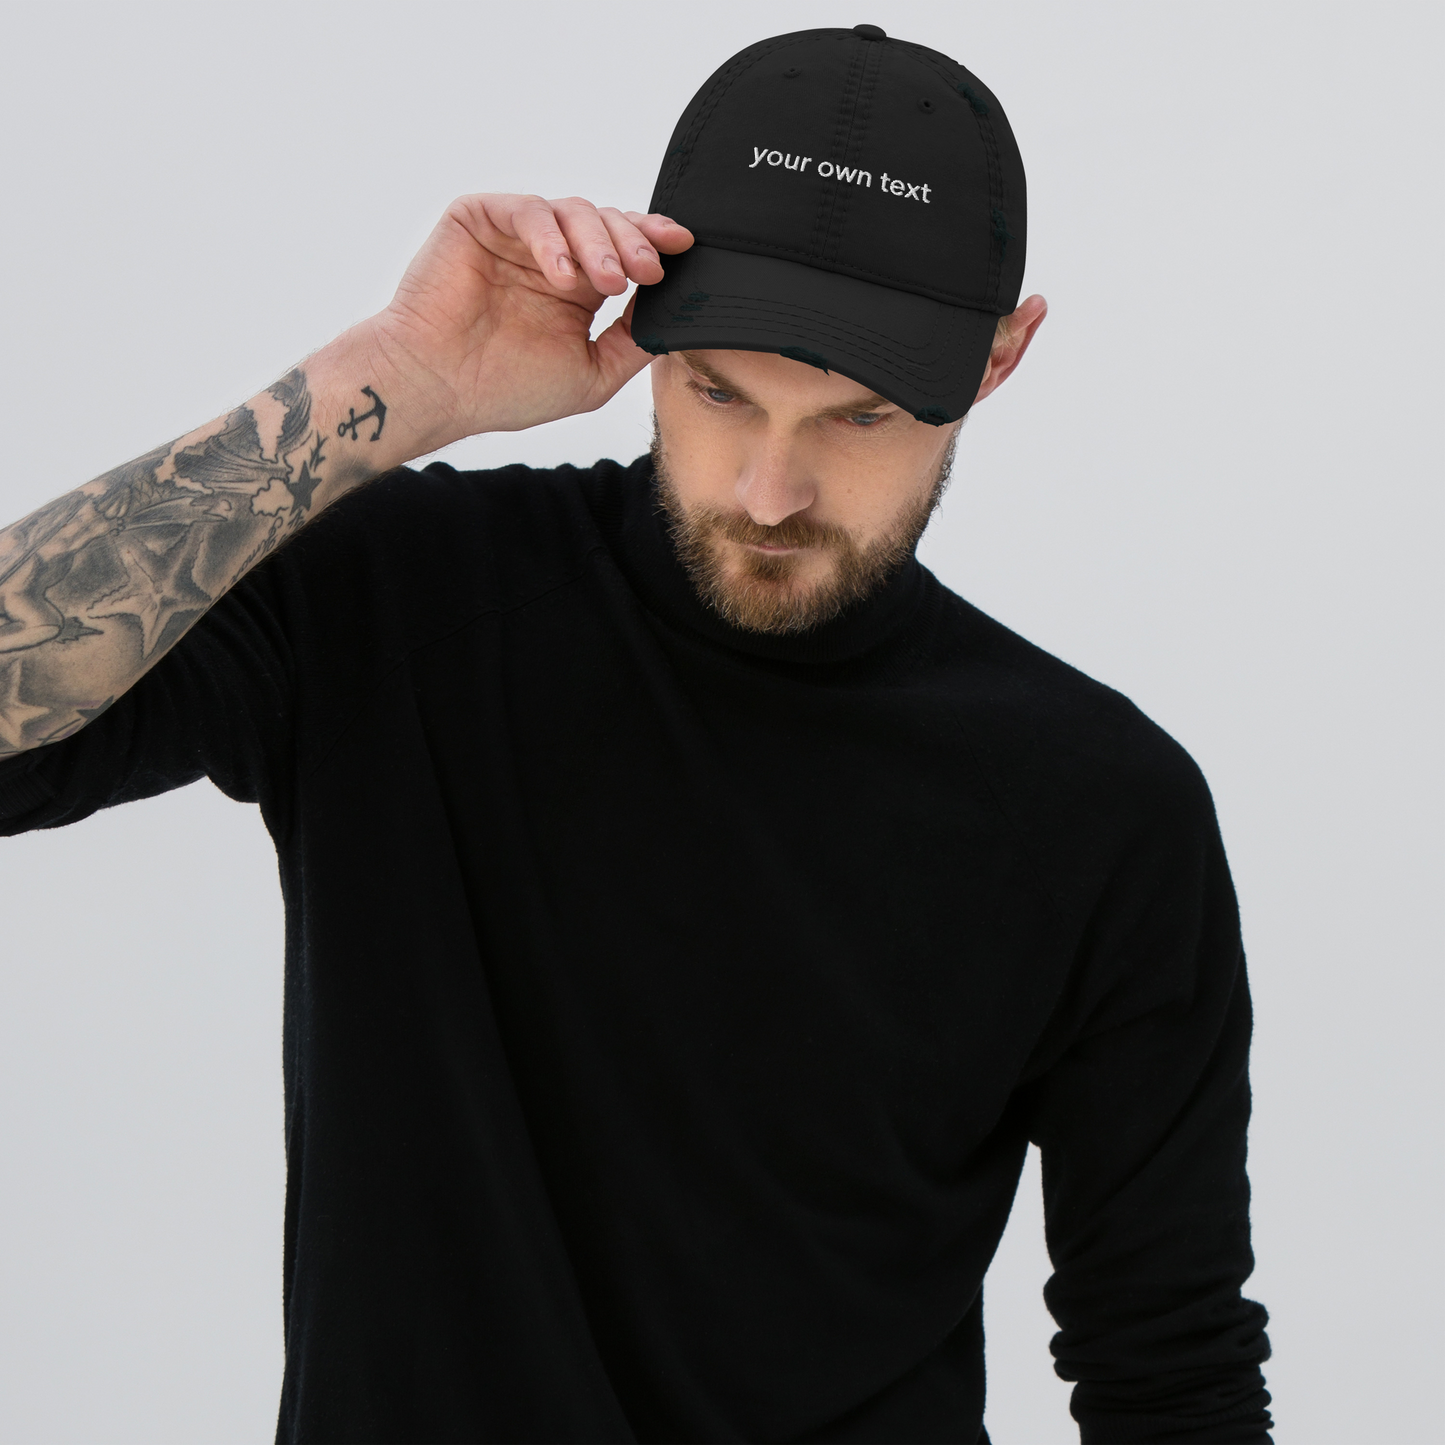 Your Own Text - Distressed Dad Hat